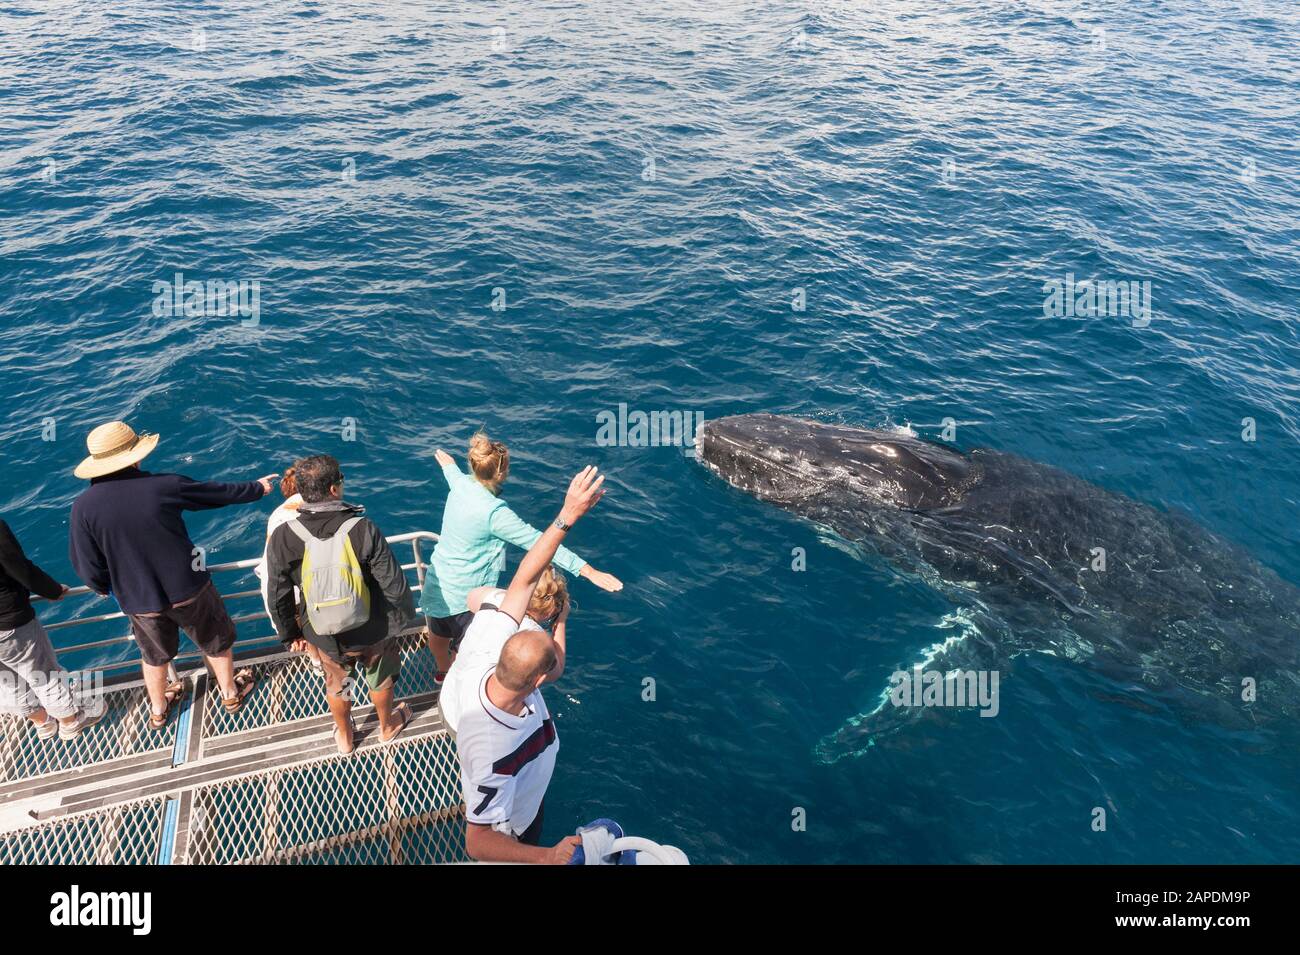 People on boat whale watching, Queensland, Australia Stock Photo